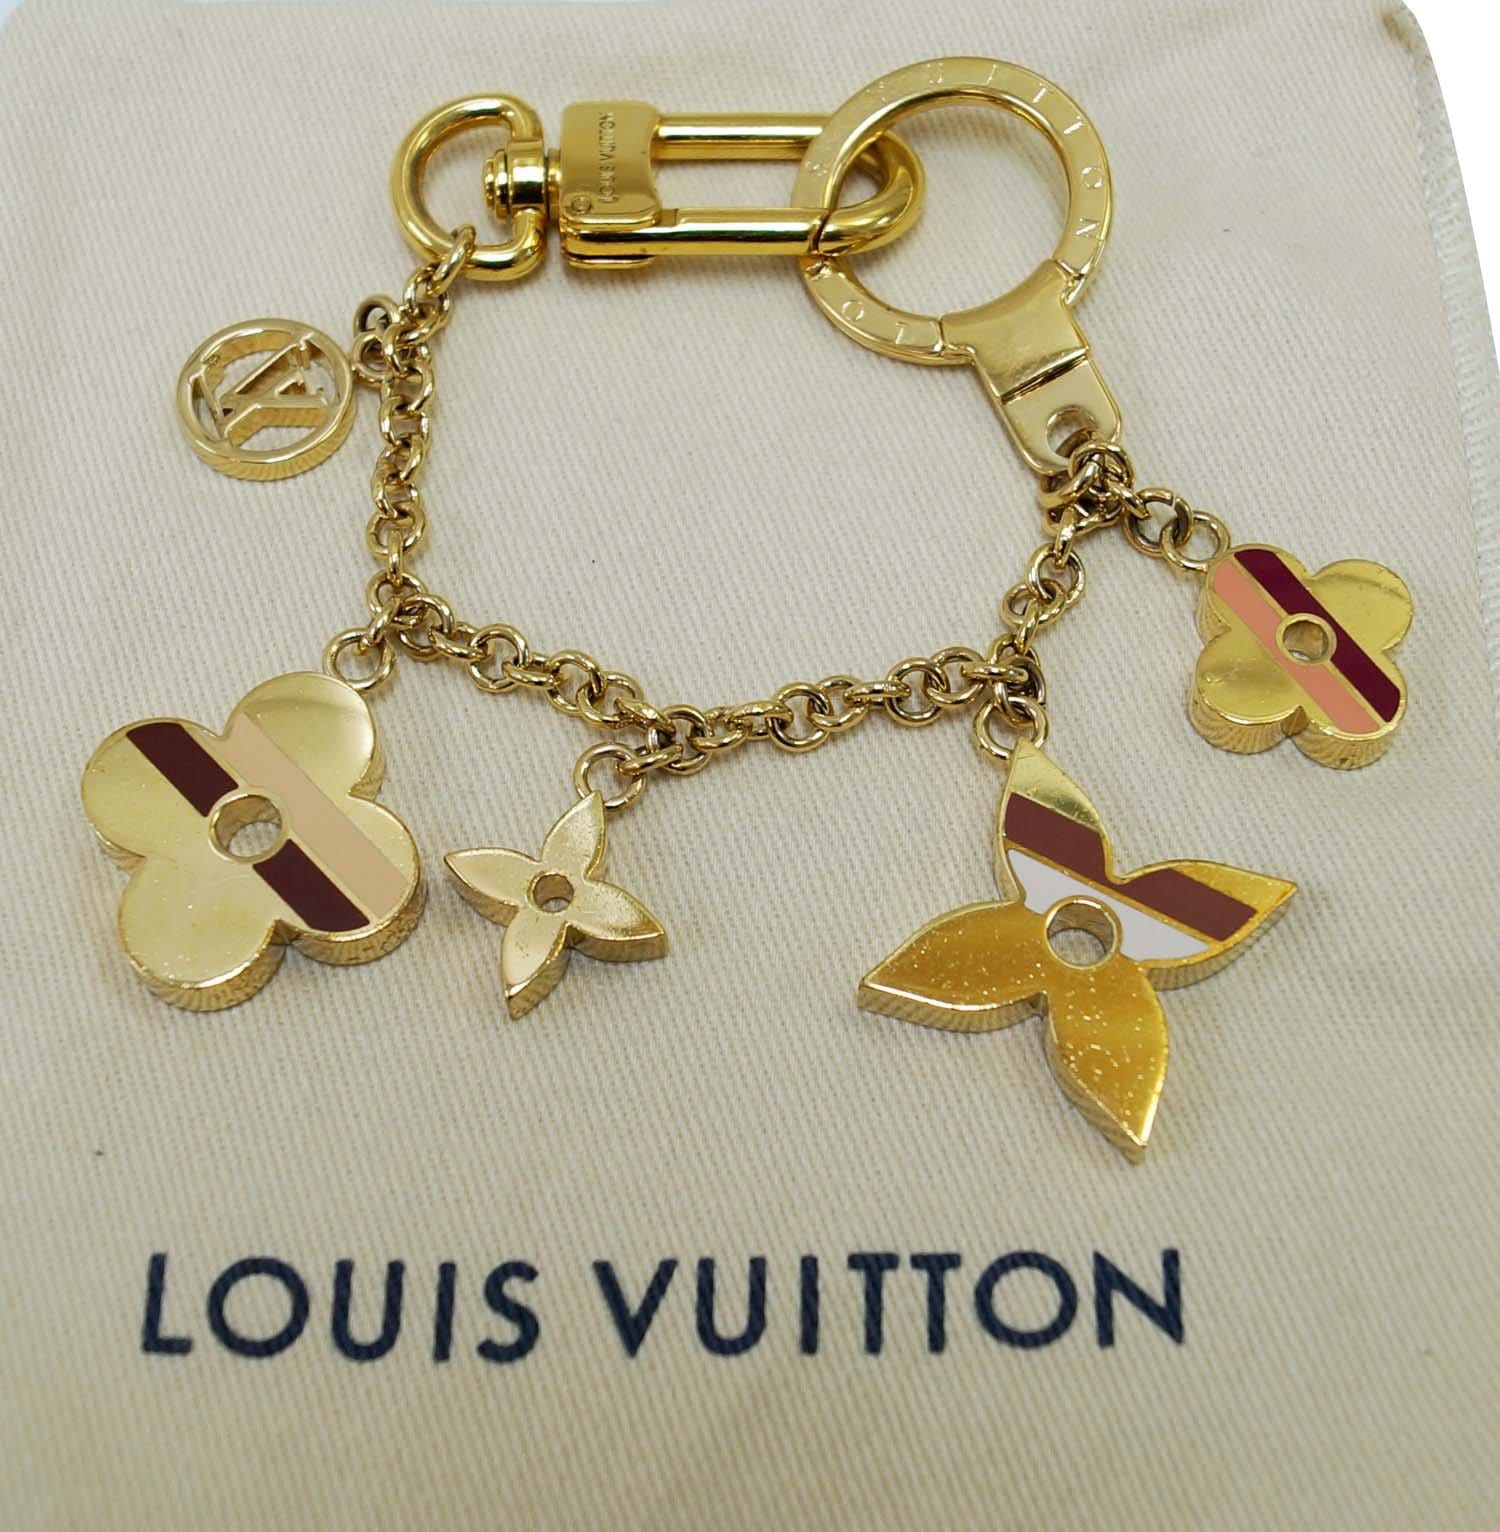 Louis Vuitton By The Pool Leather Flower Bag Charm Multiple colors